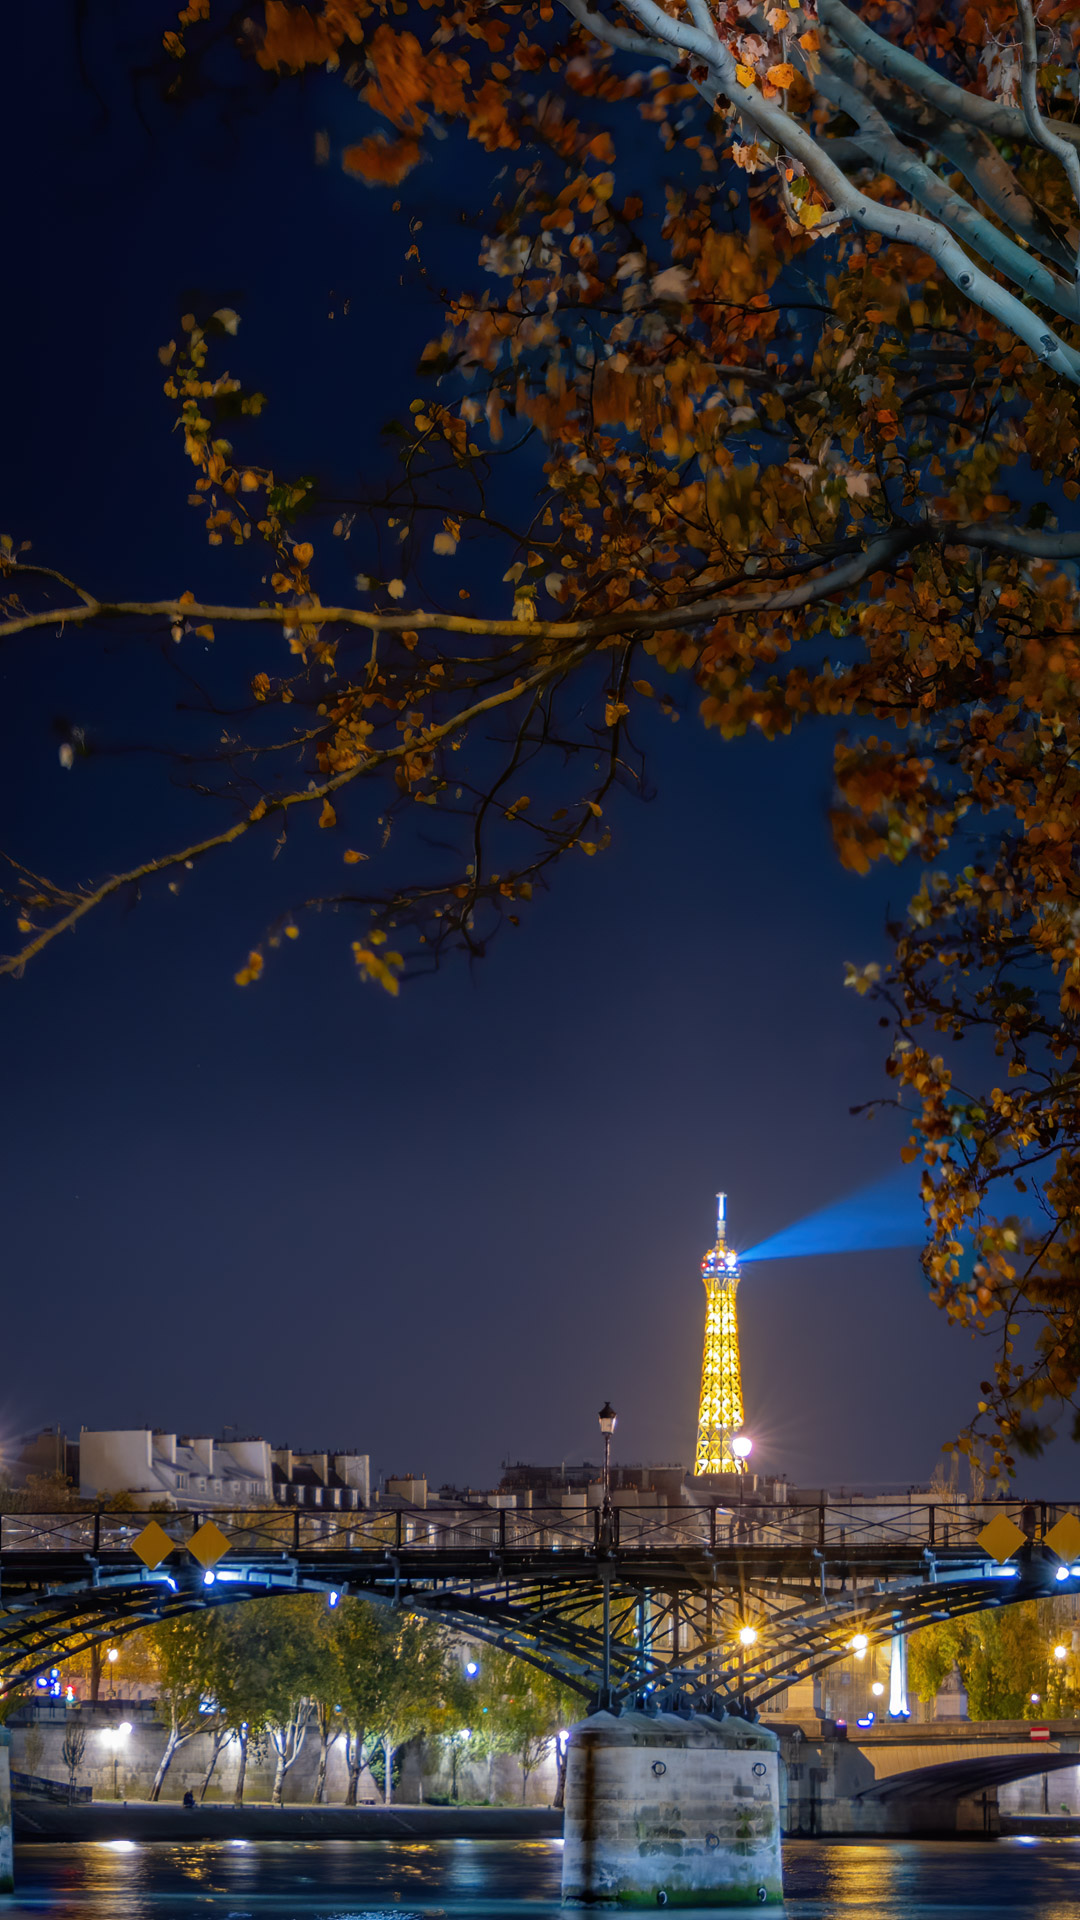 View the magic of Paris at night with with a beautiful cityscape at night